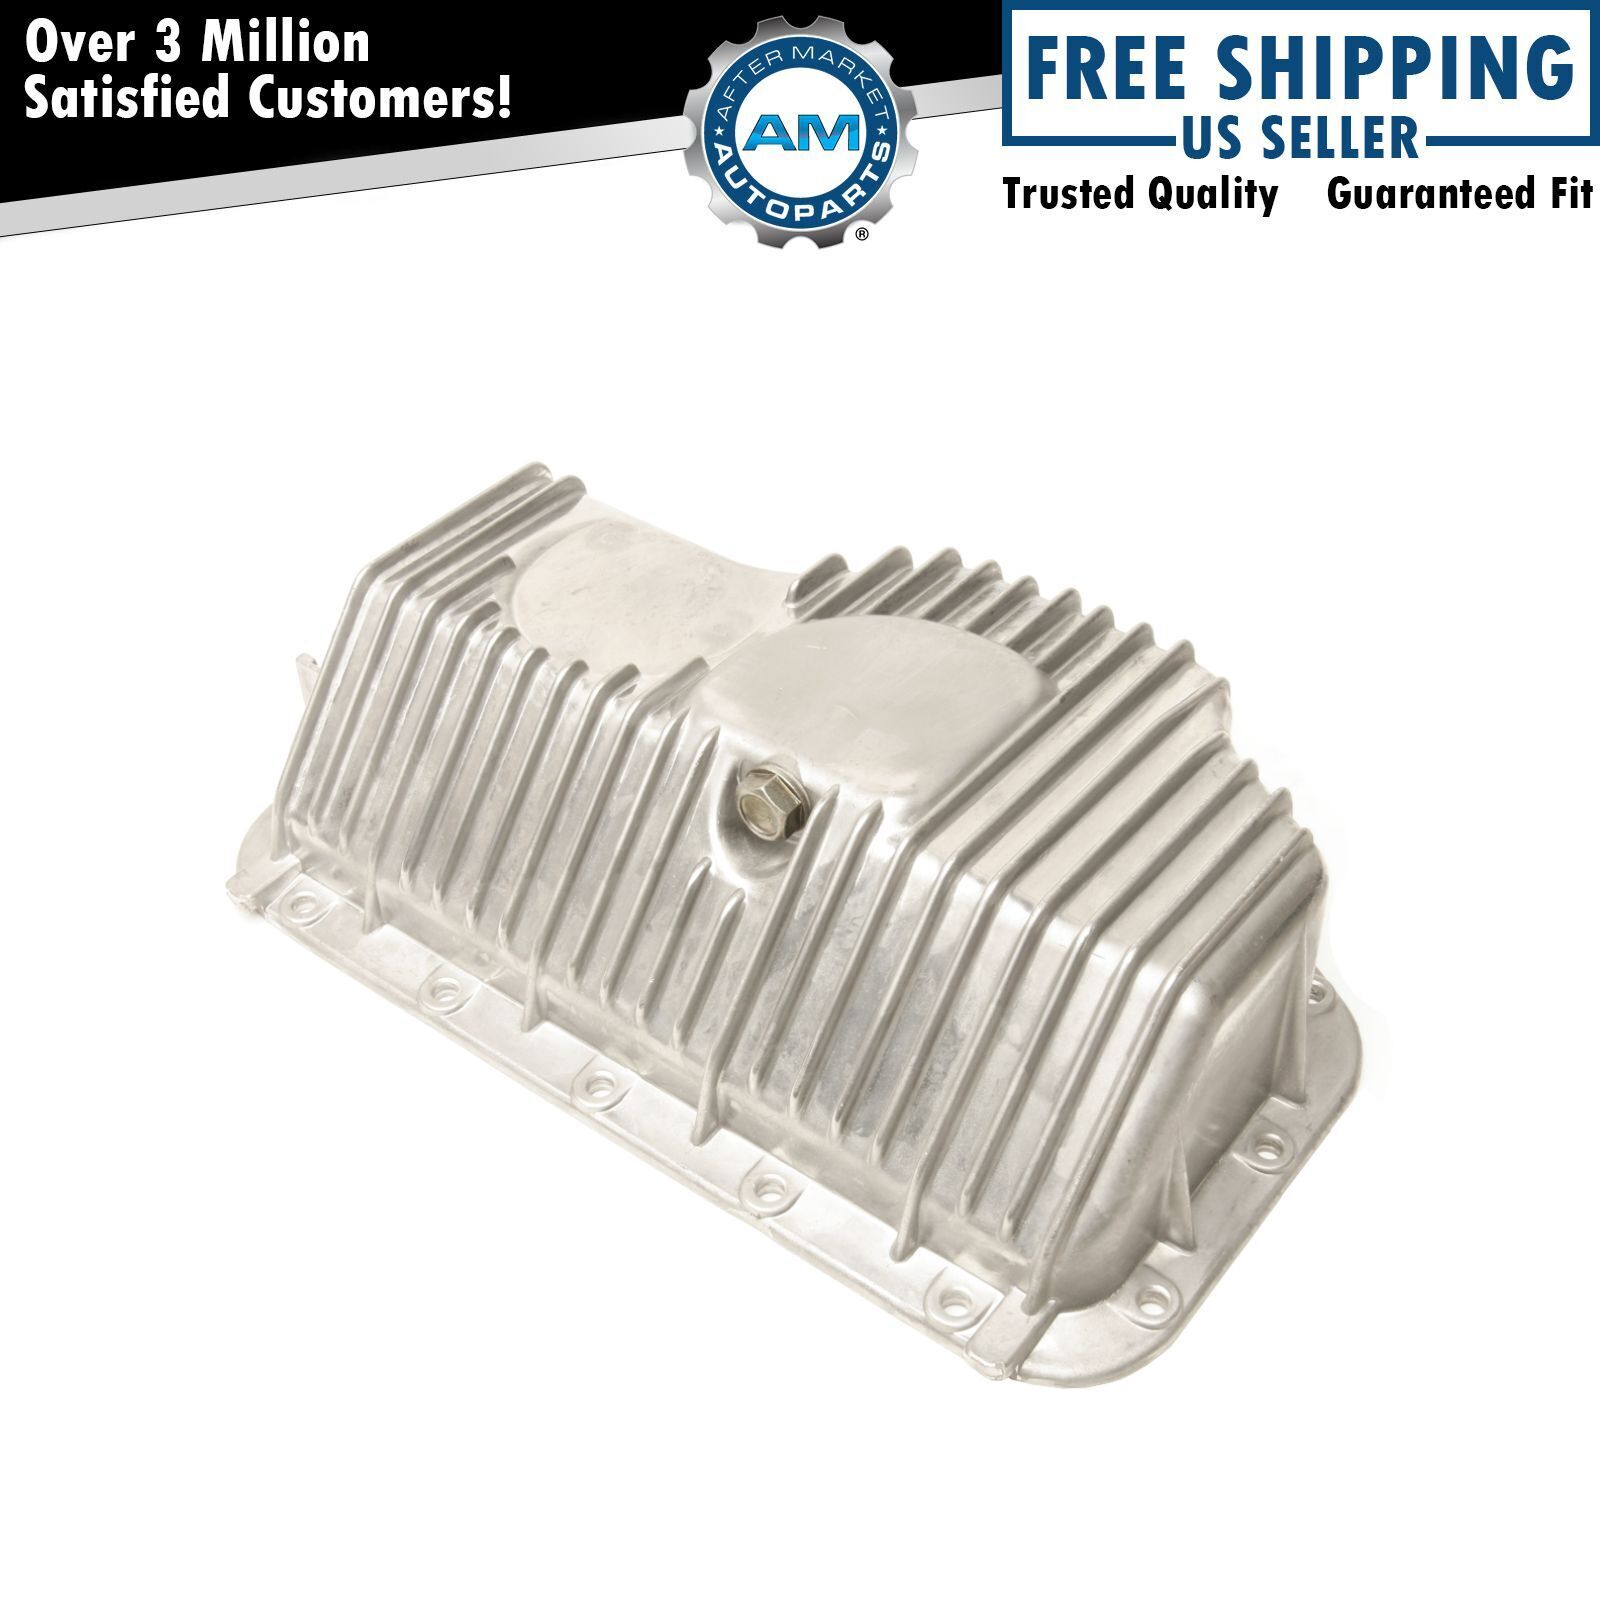 Lower Aluminum Engine Oil Pan for 91-92 BMW 325is 318i